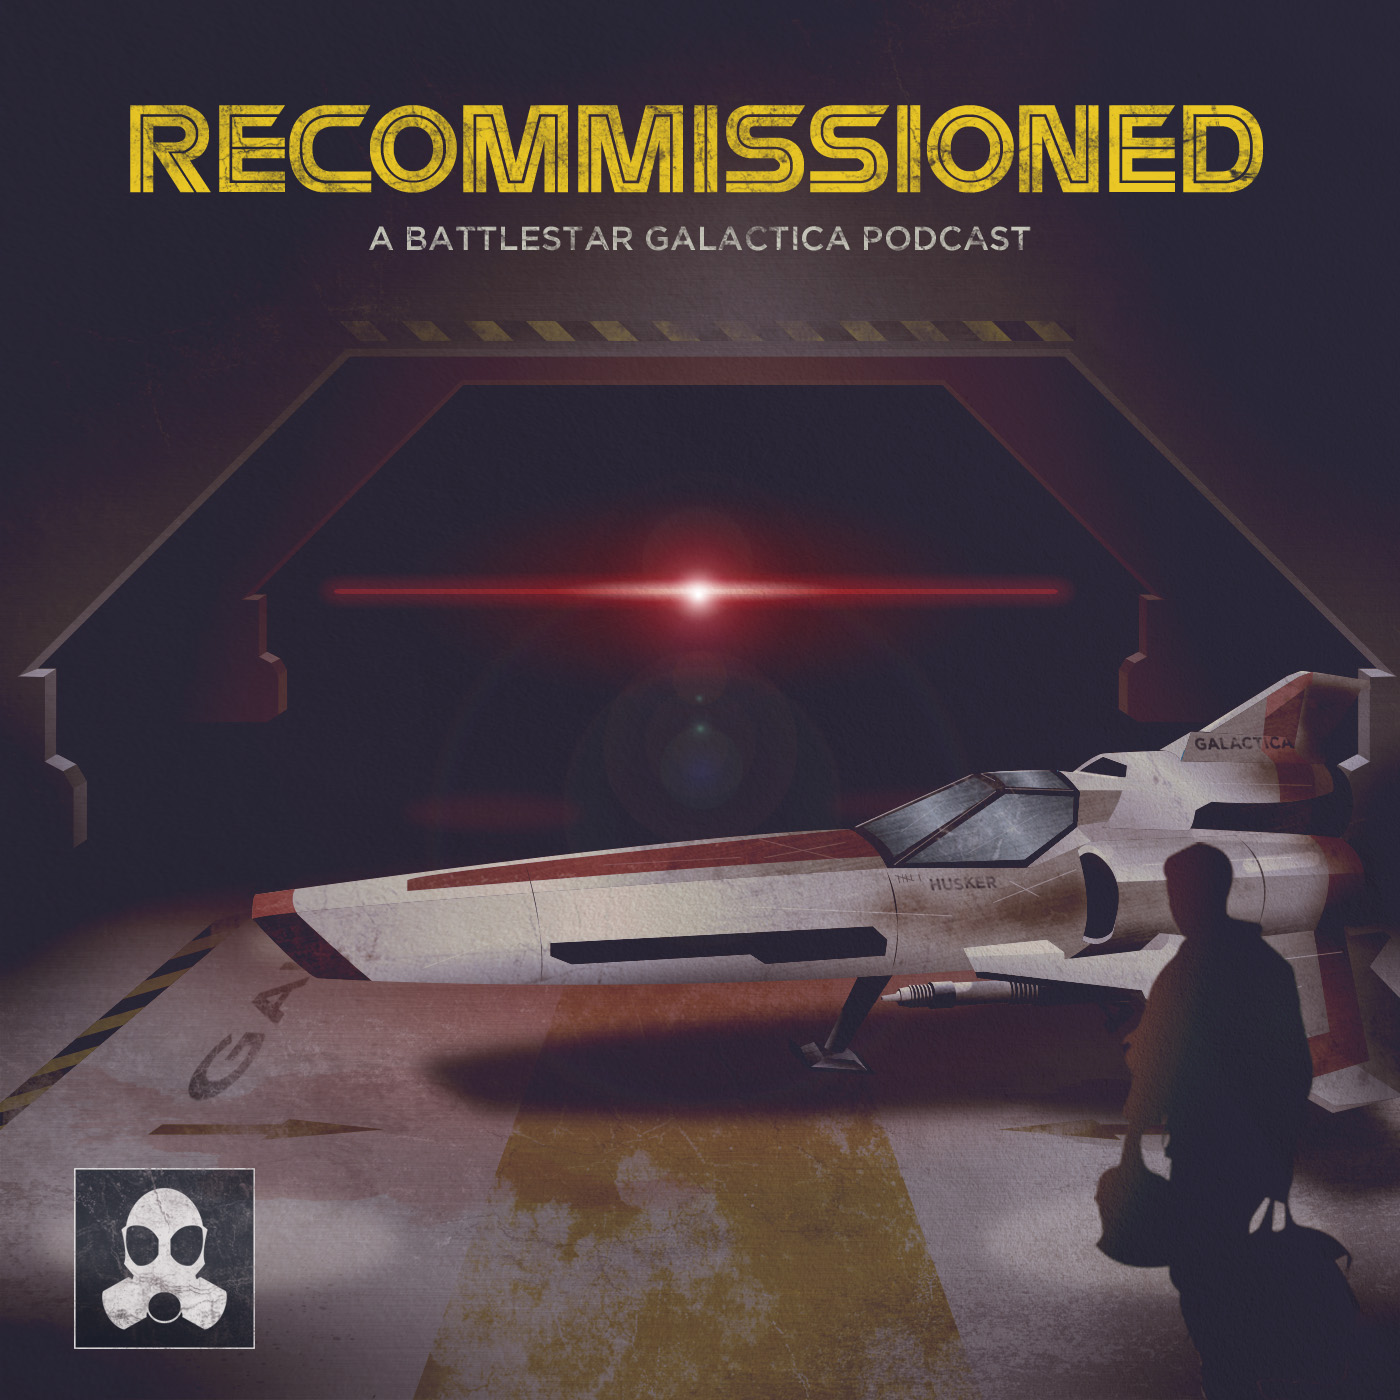 1-9: Battlestar Galactica "Tigh Me Up, Tigh Me Down" [Republished]